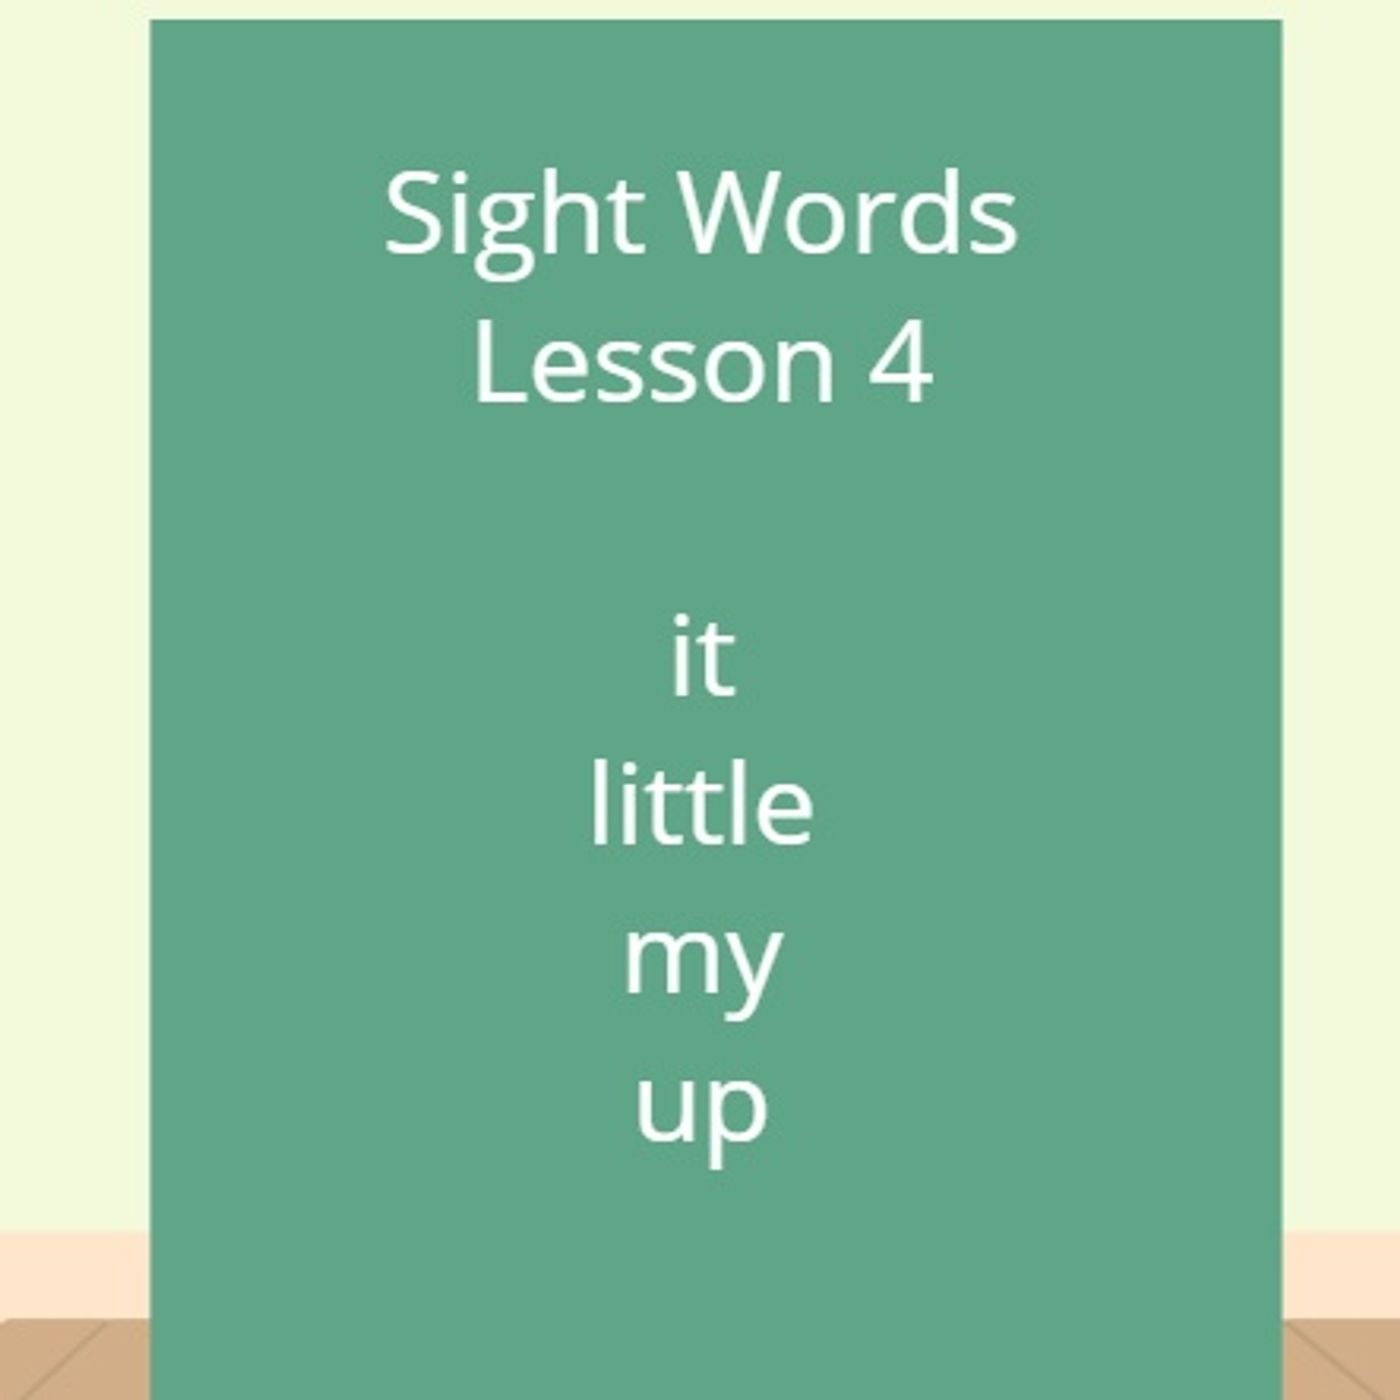 Sight Words Lesson 4